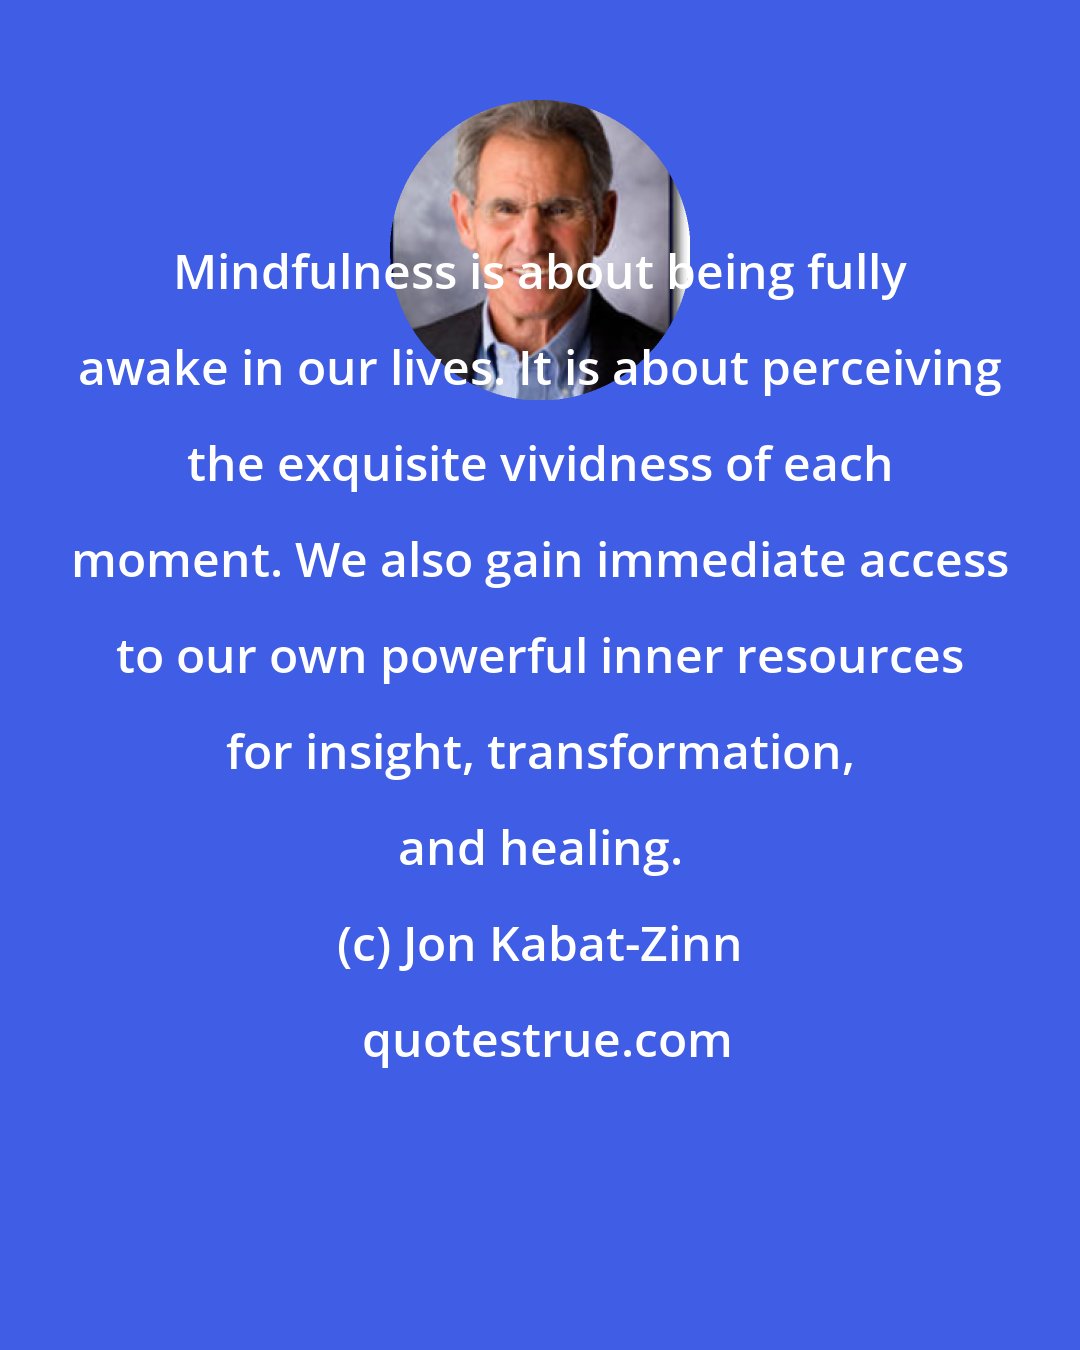 Jon Kabat-Zinn: Mindfulness is about being fully awake in our lives. It is about perceiving the exquisite vividness of each moment. We also gain immediate access to our own powerful inner resources for insight, transformation, and healing.